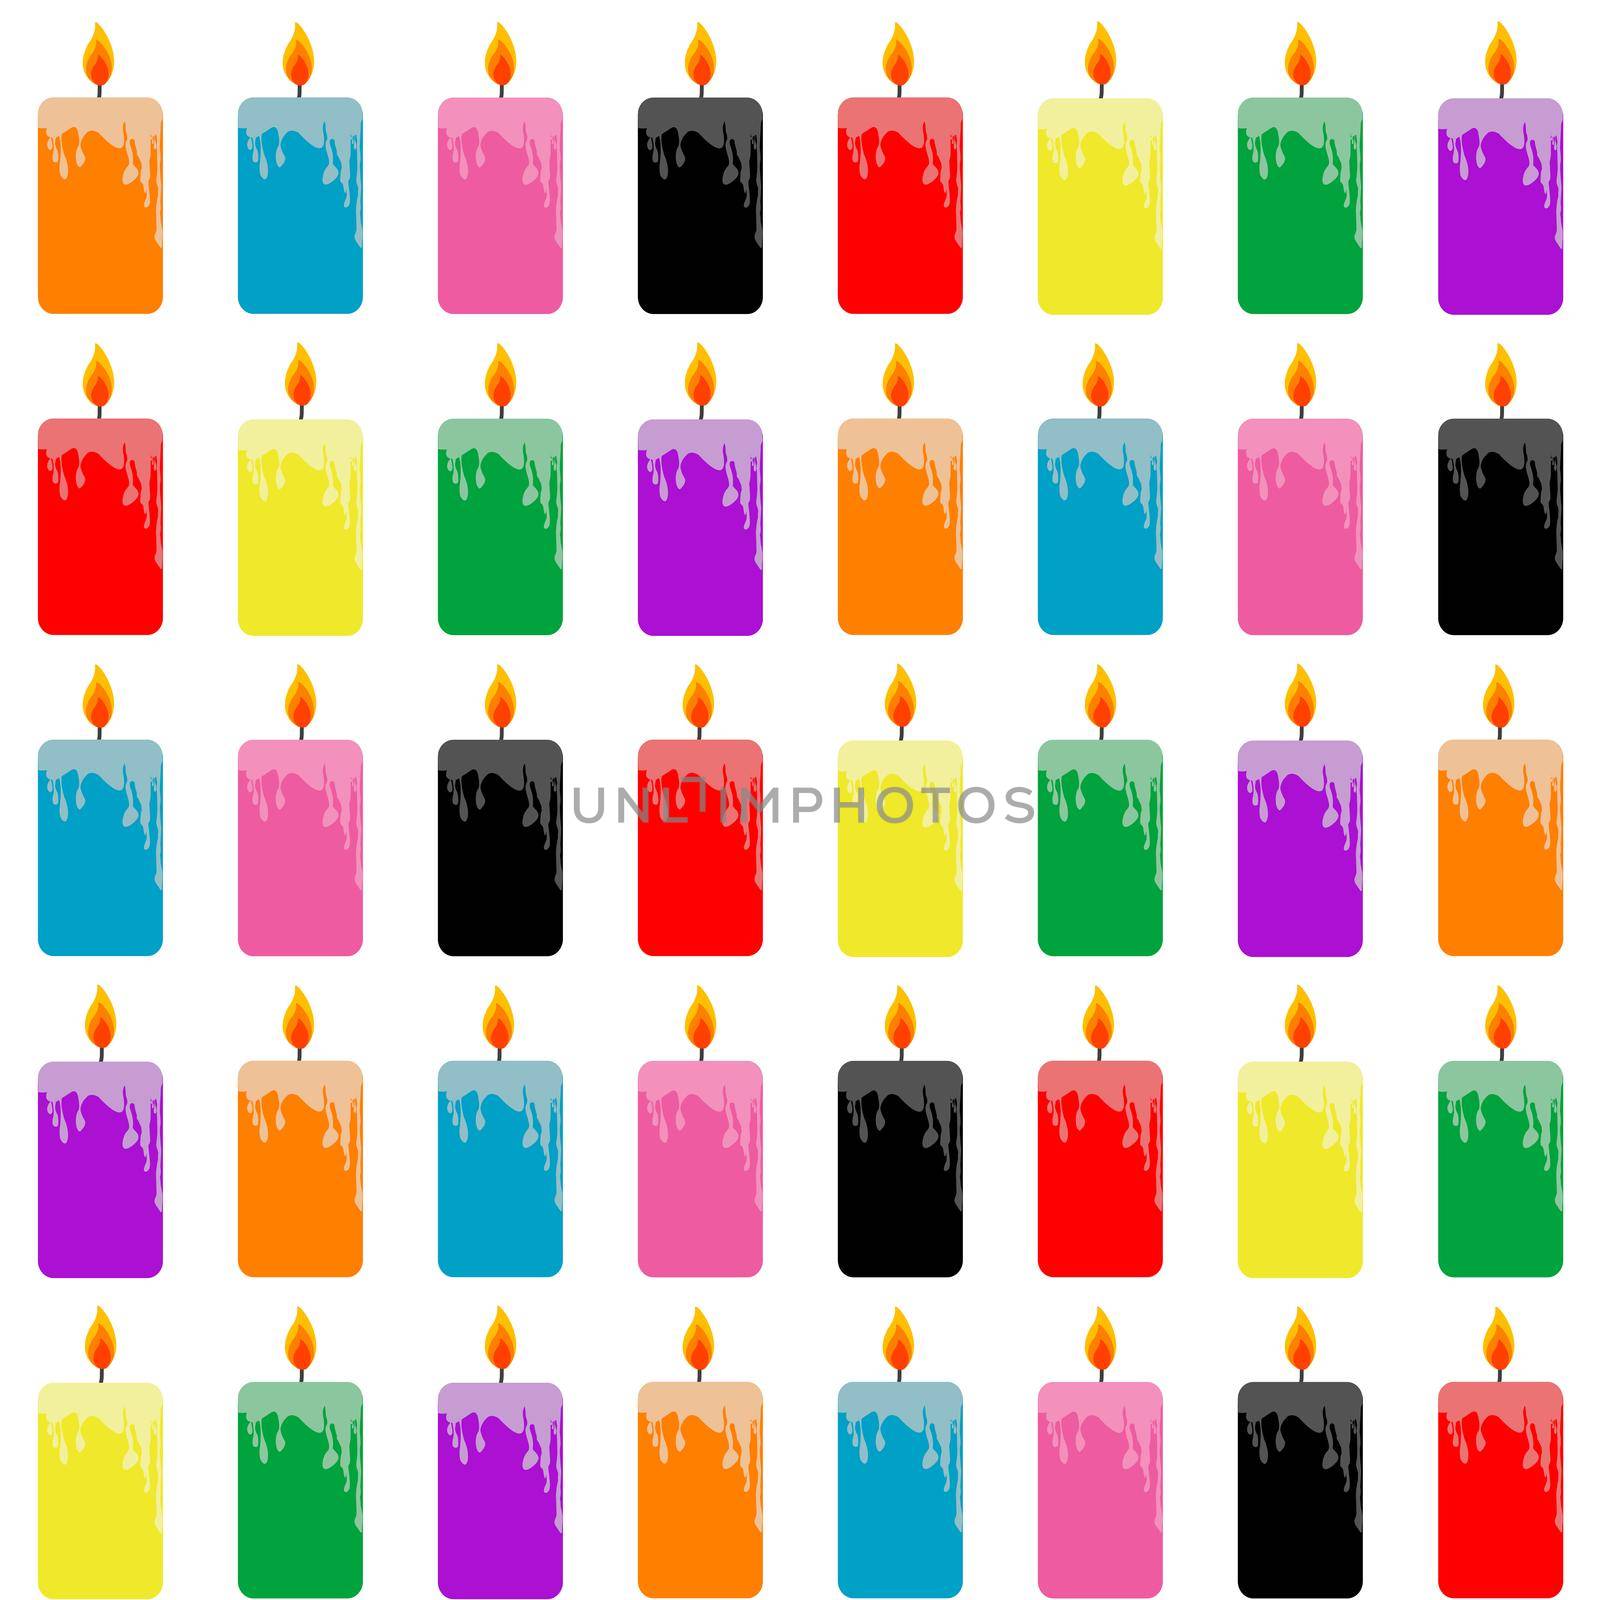 Wrapping paper with rows of colored candles